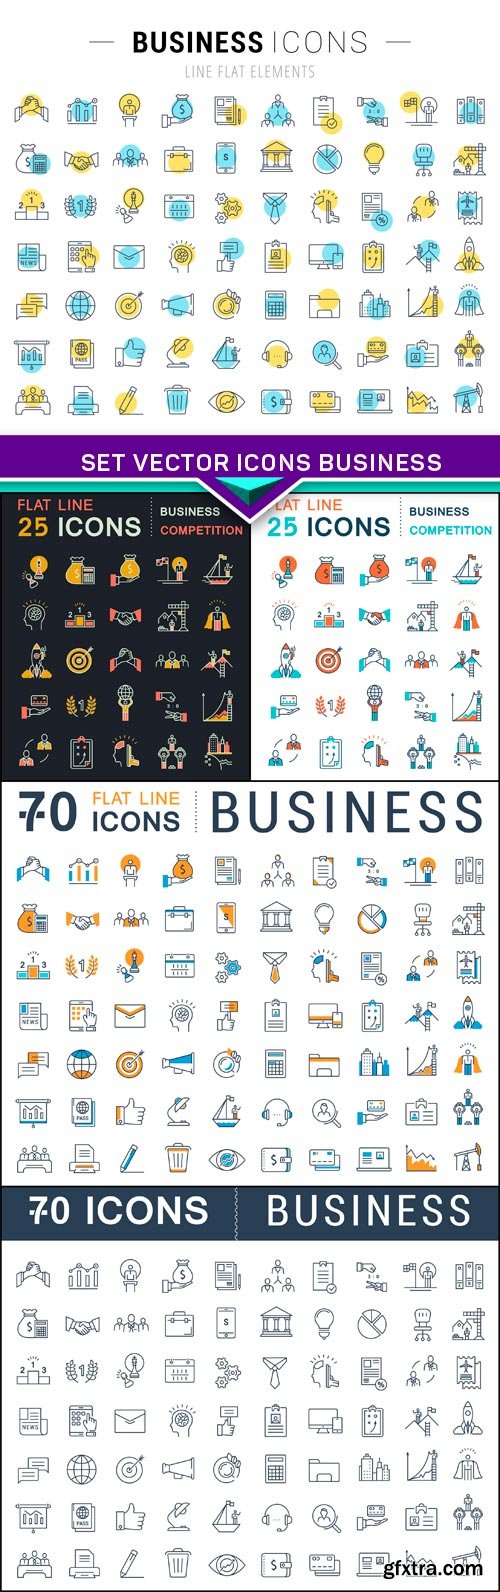 Set Vector Icons Business 5X EPS